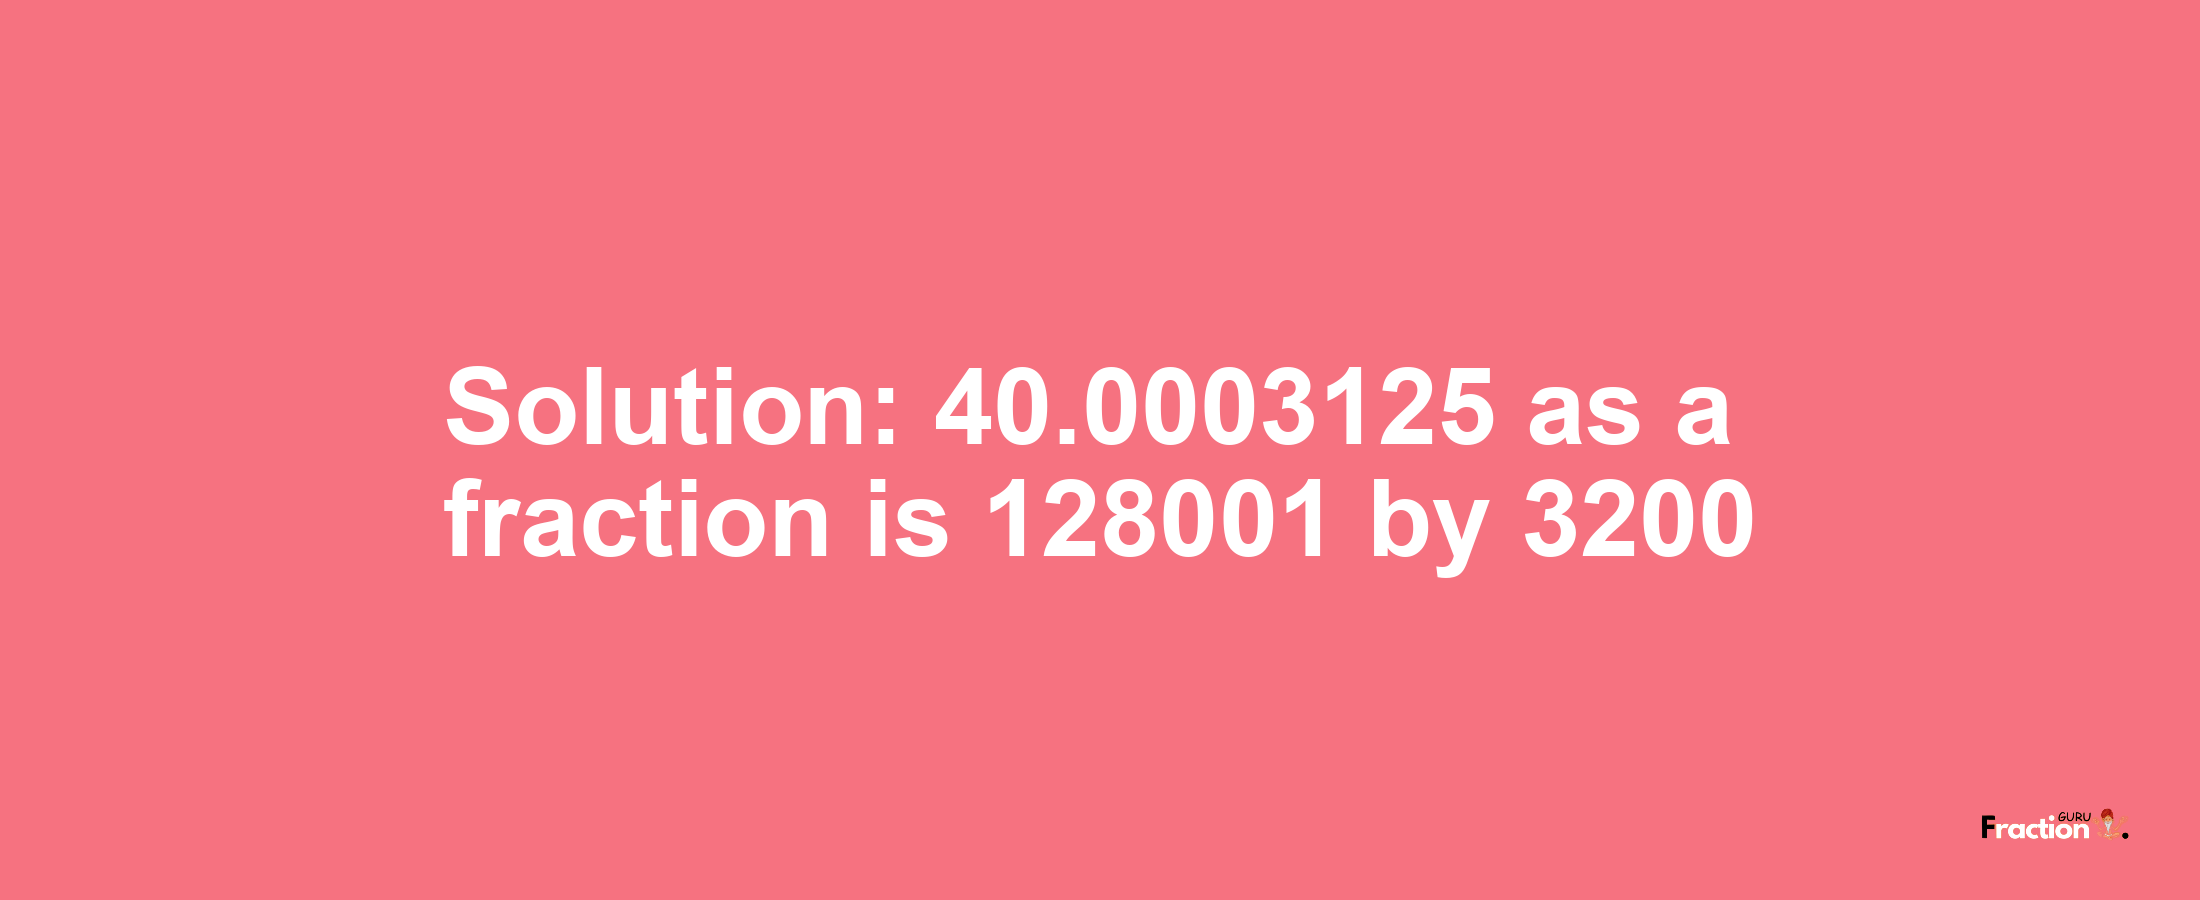 Solution:40.0003125 as a fraction is 128001/3200